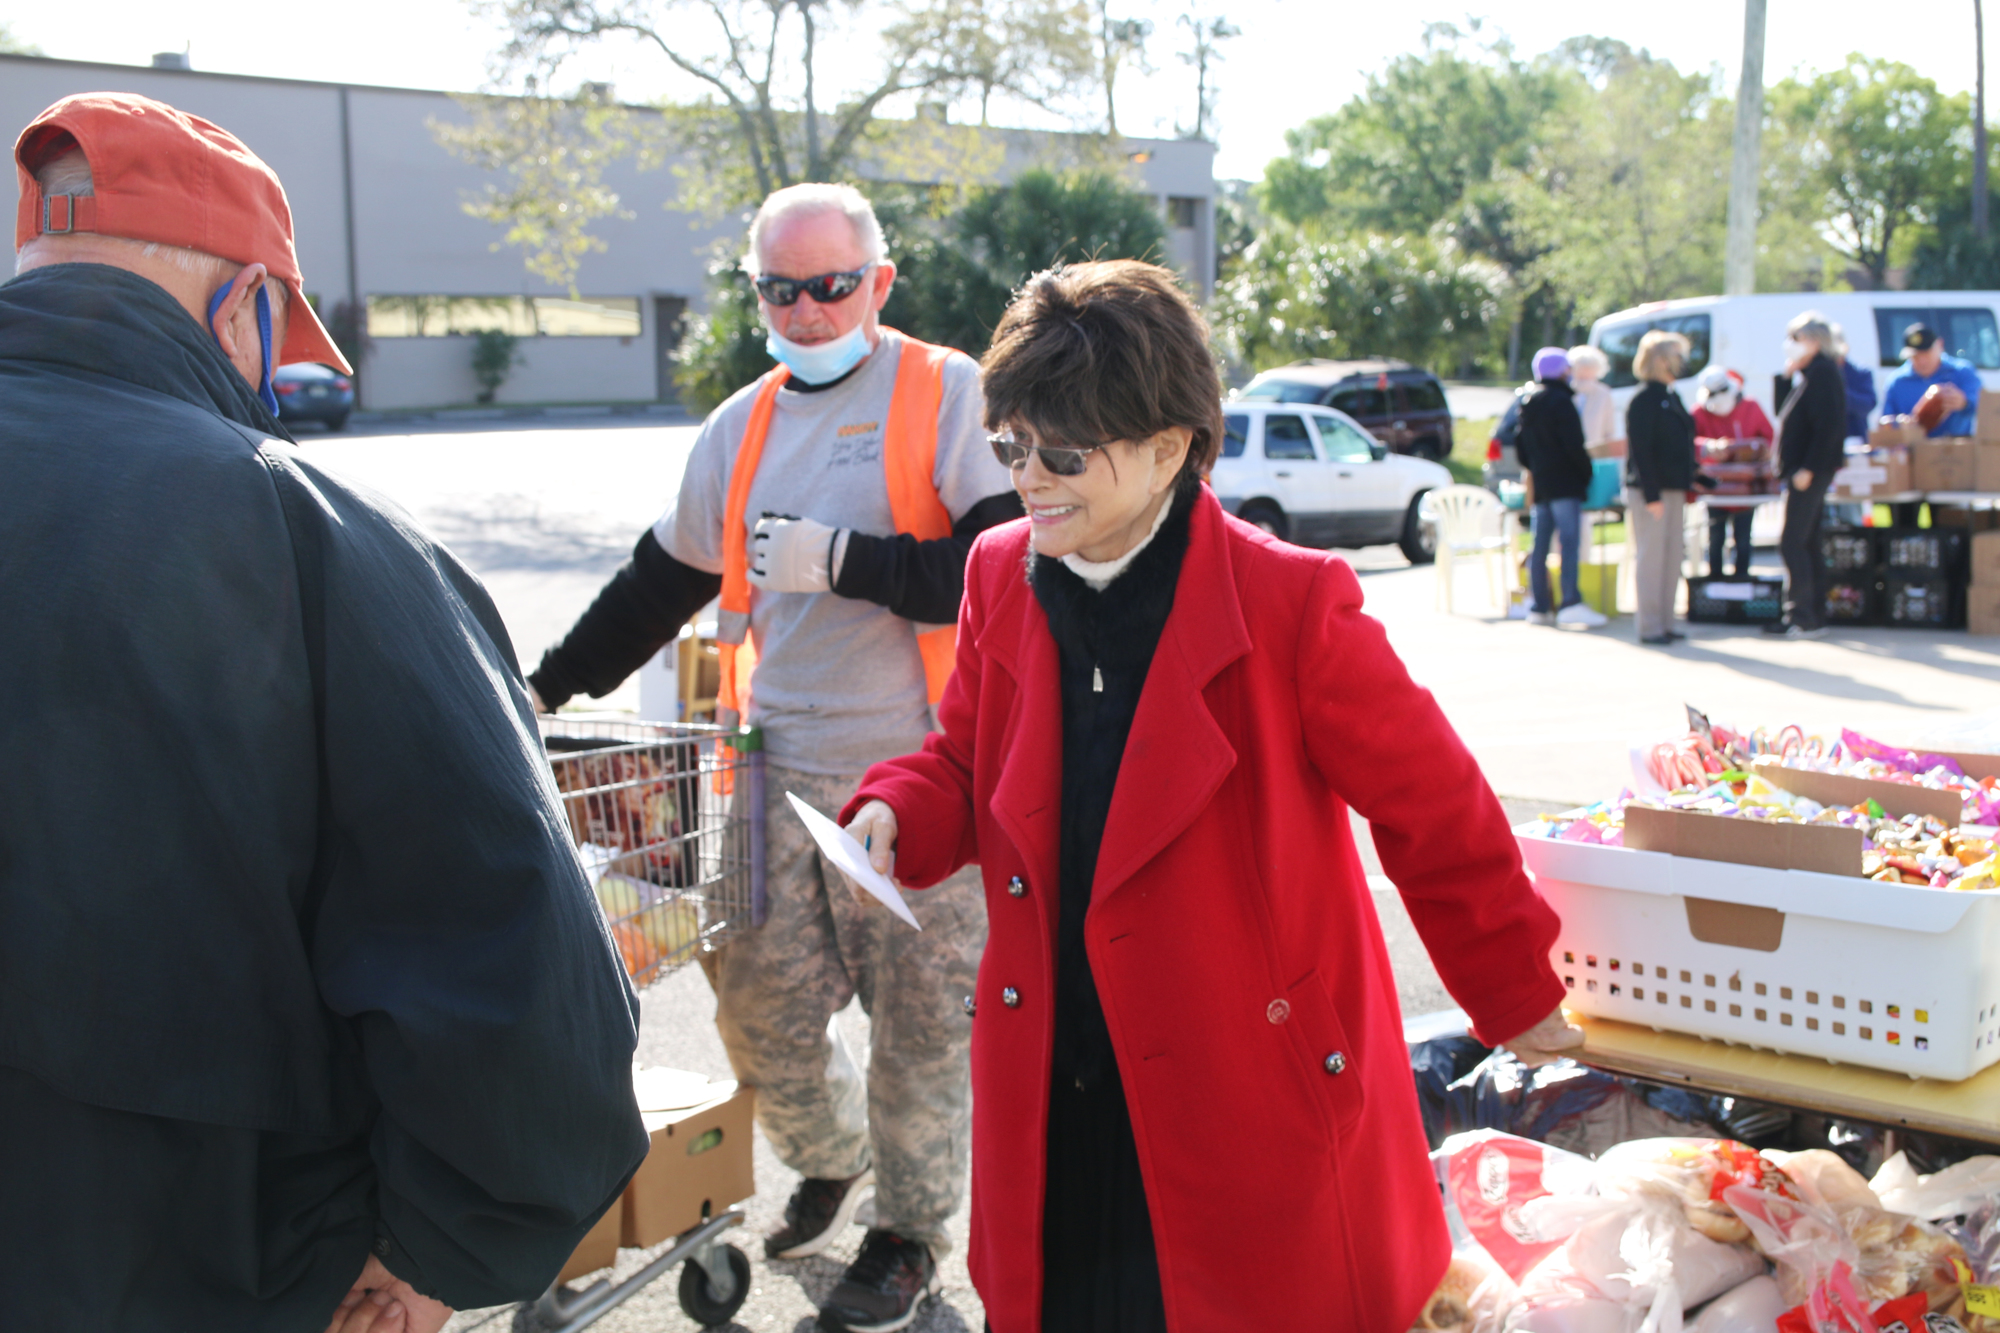 Gloria Max, executive director of the Jewish Federation of Flagler and Volusia Counties, held an Easter food distribution event in April 2021. File photo